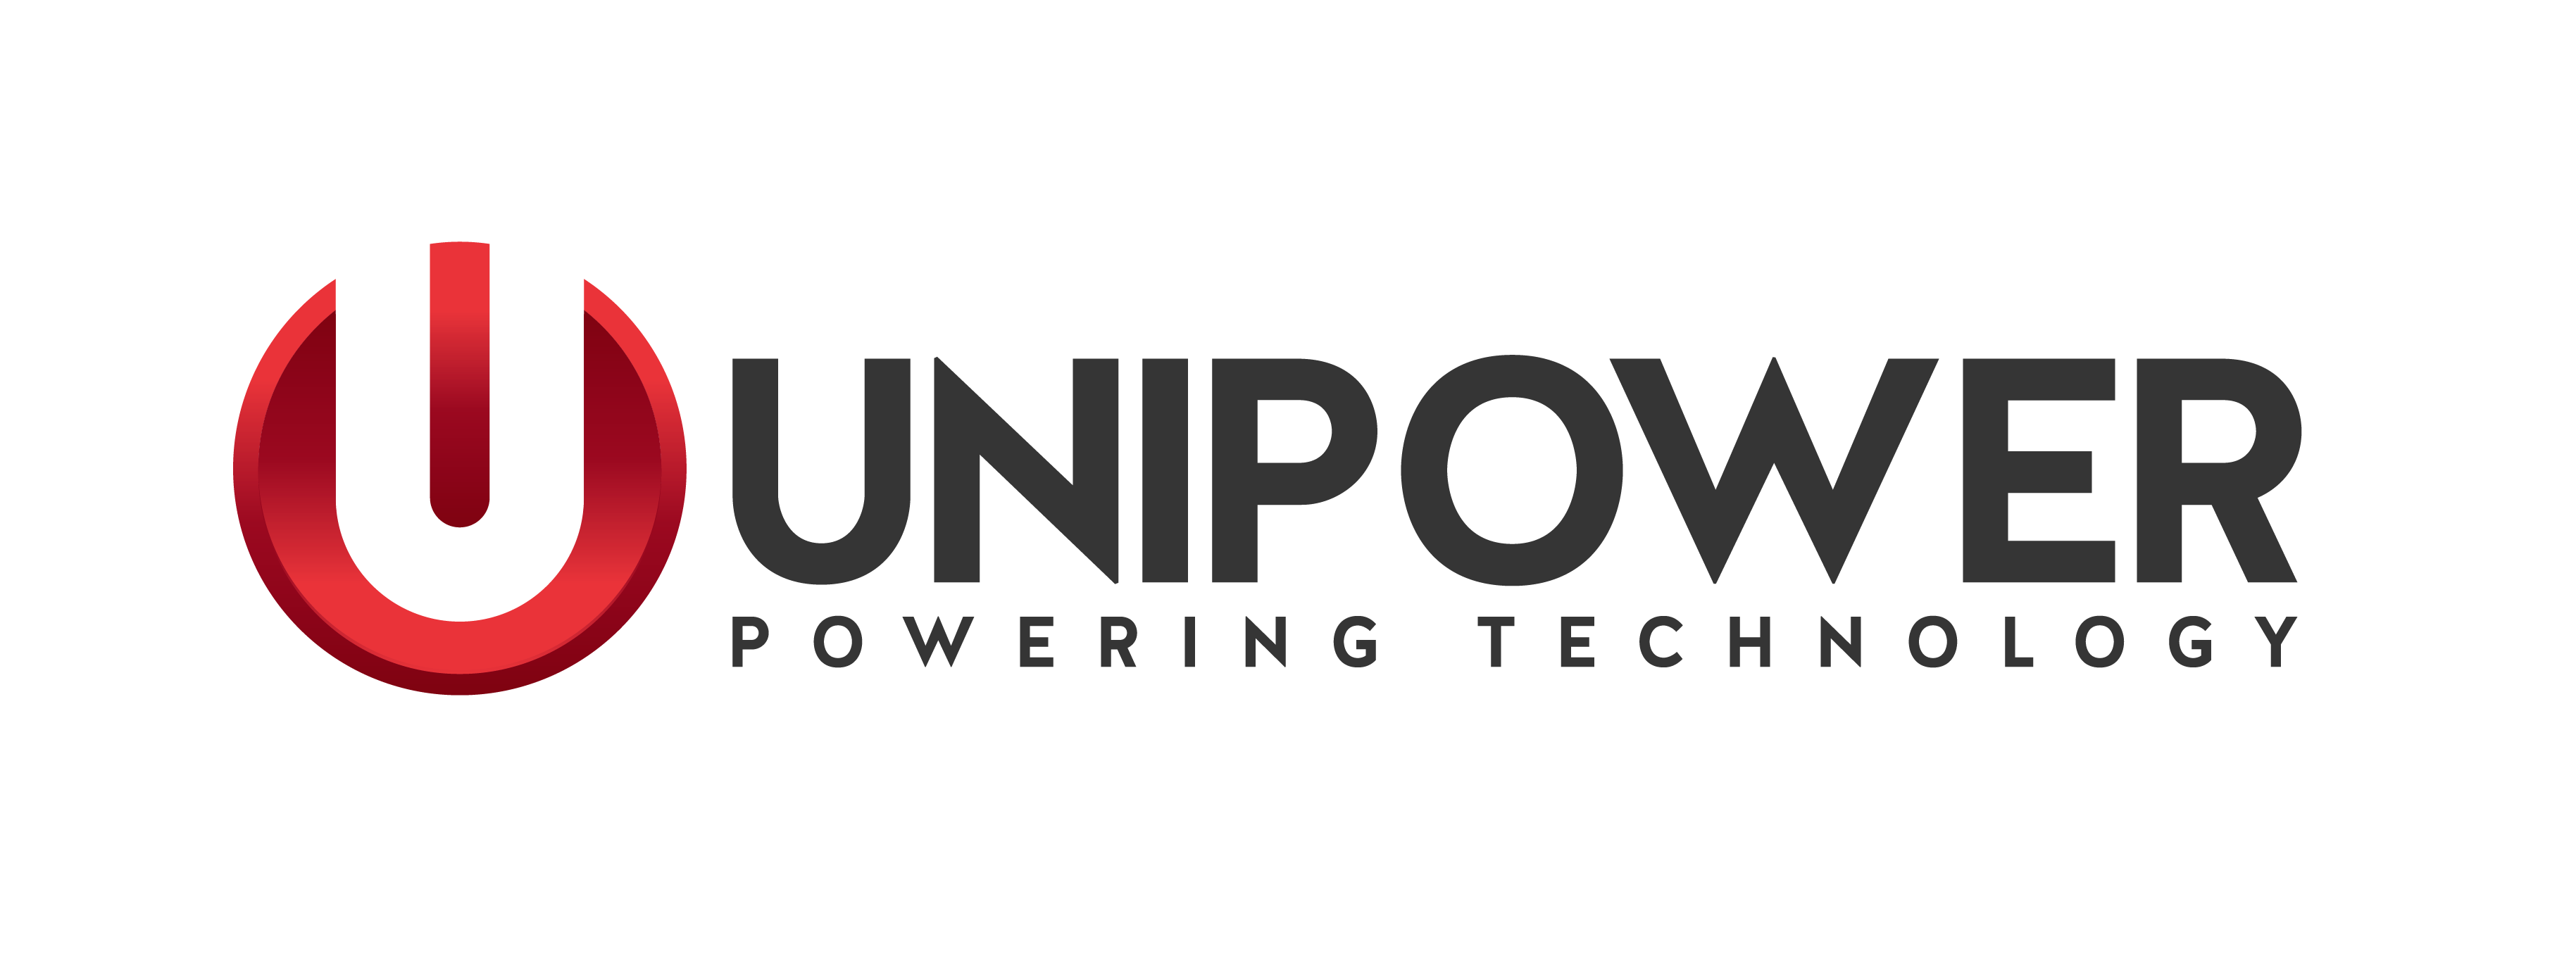 UNIPOWER Announces Highly Efficient Modular Inverter Systems